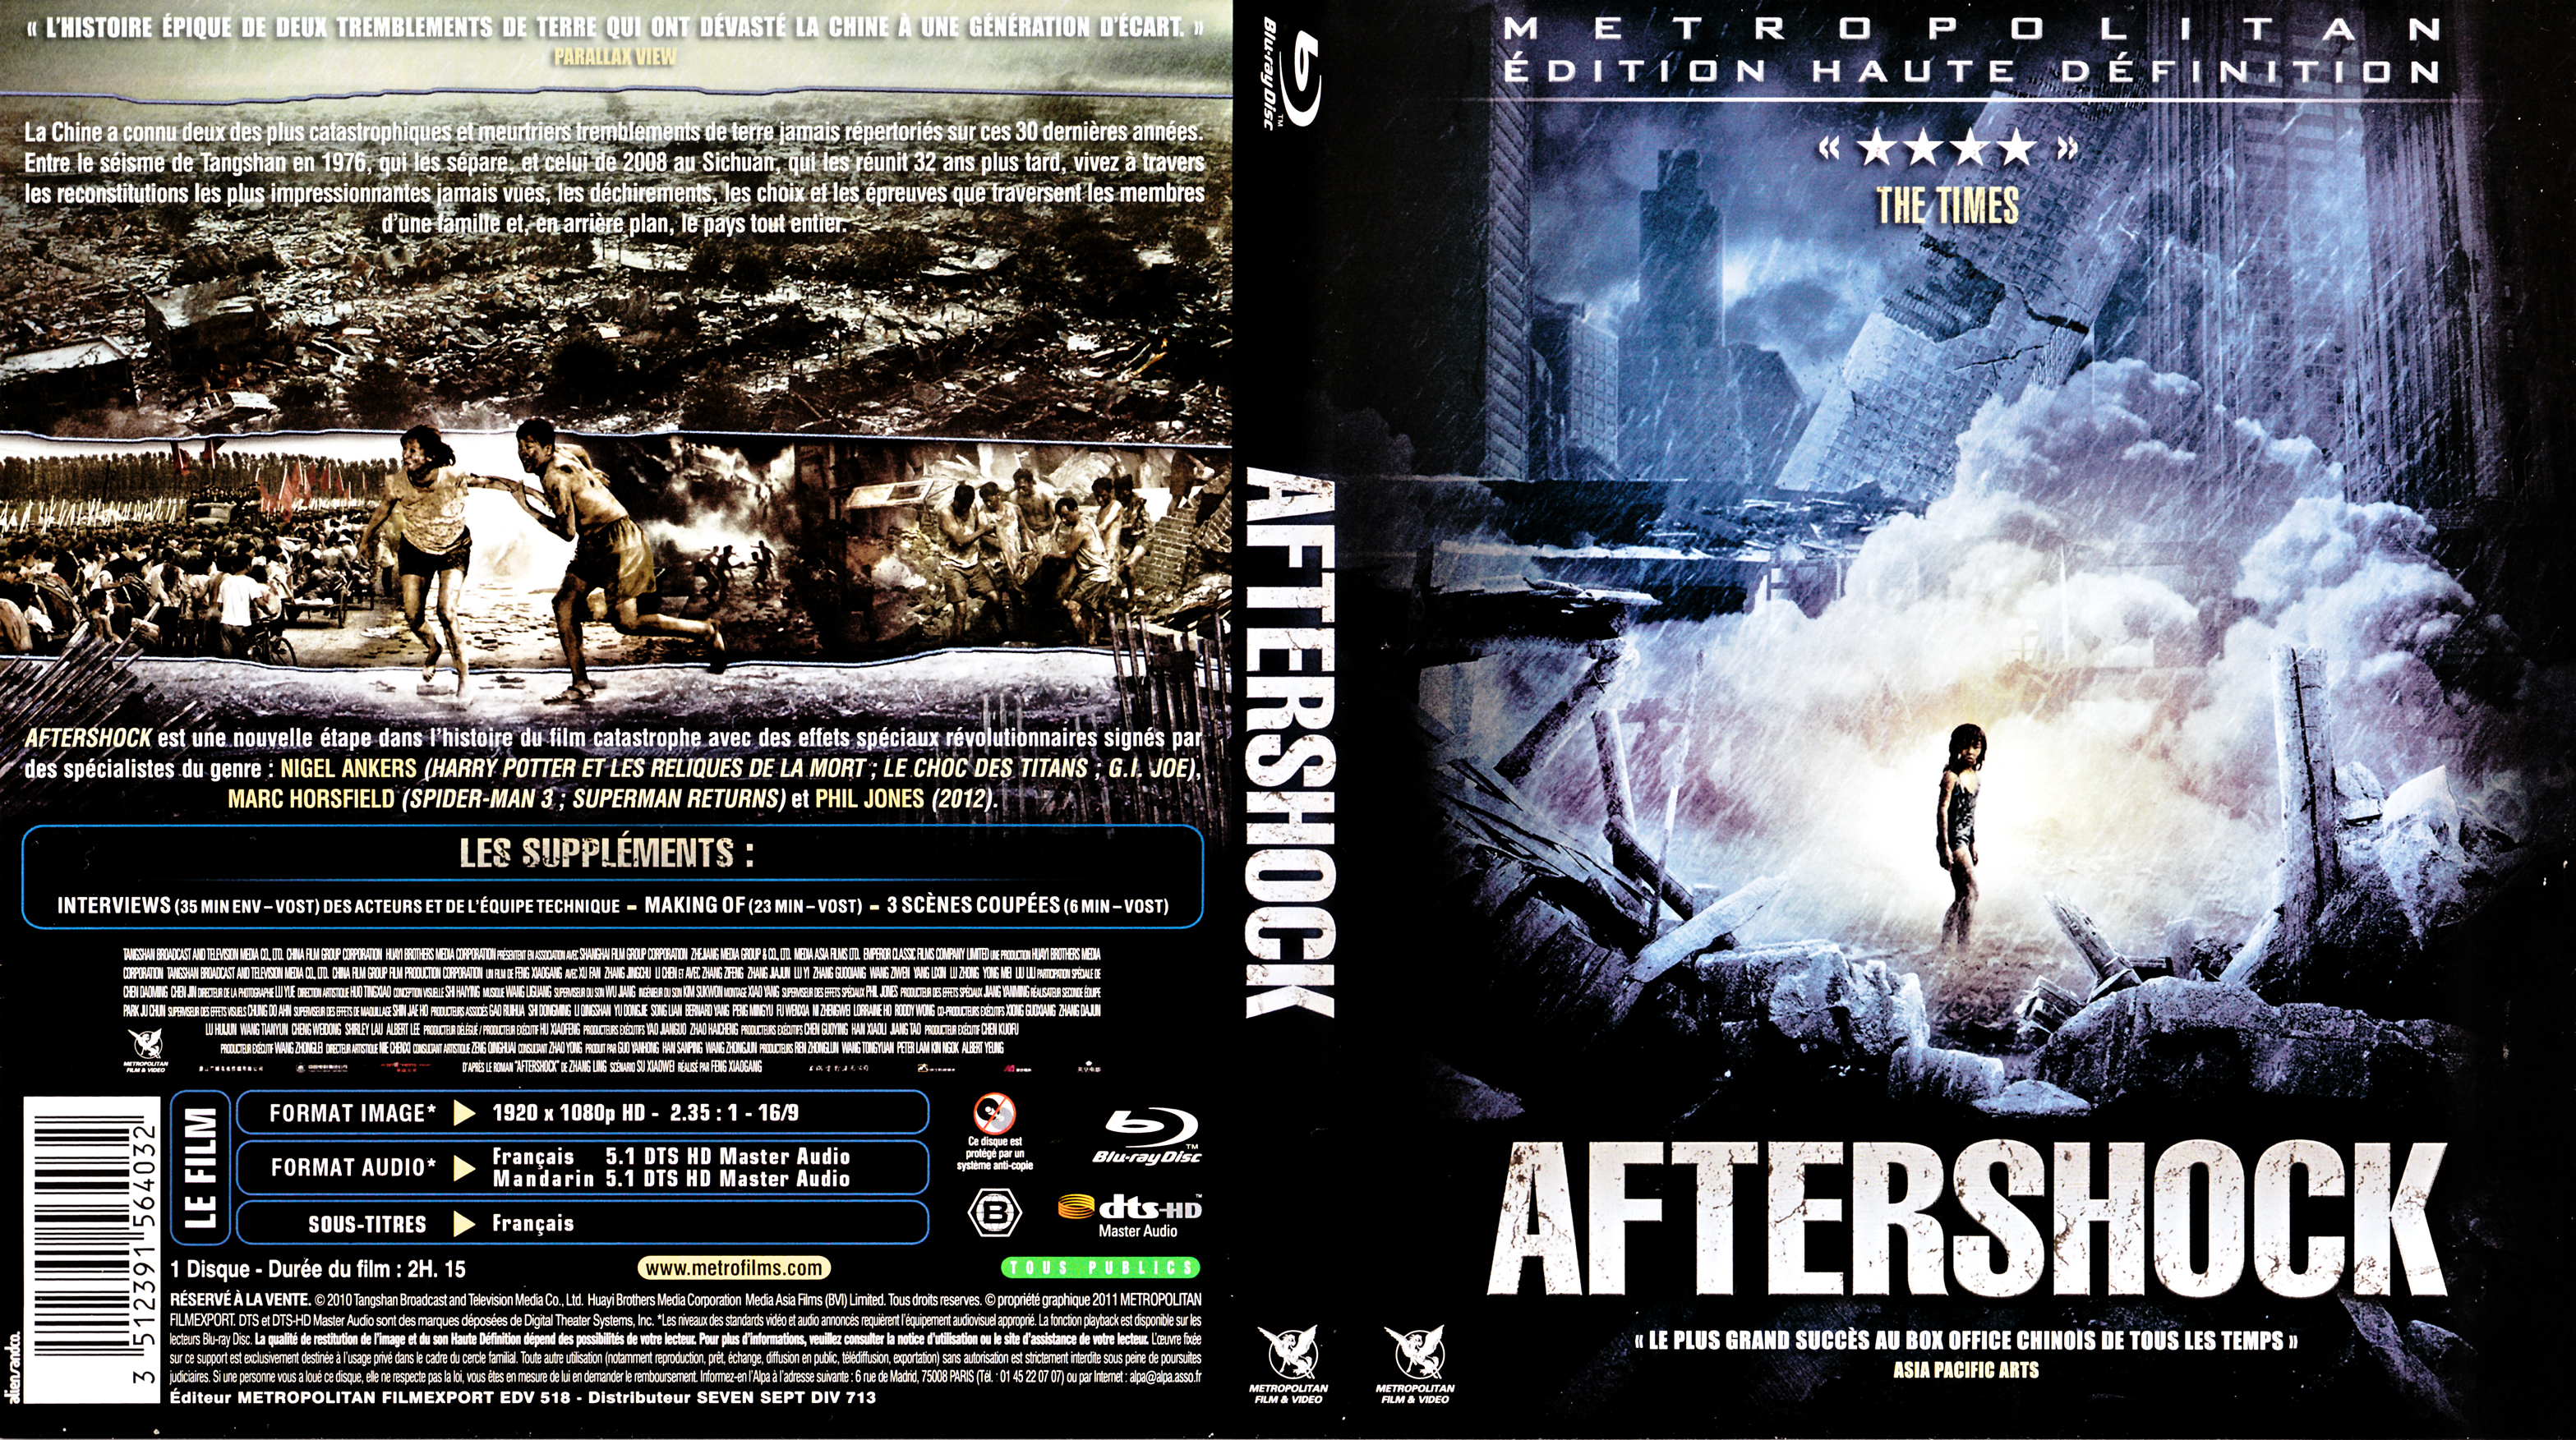 Jaquette DVD Aftershock (BLU-RAY)